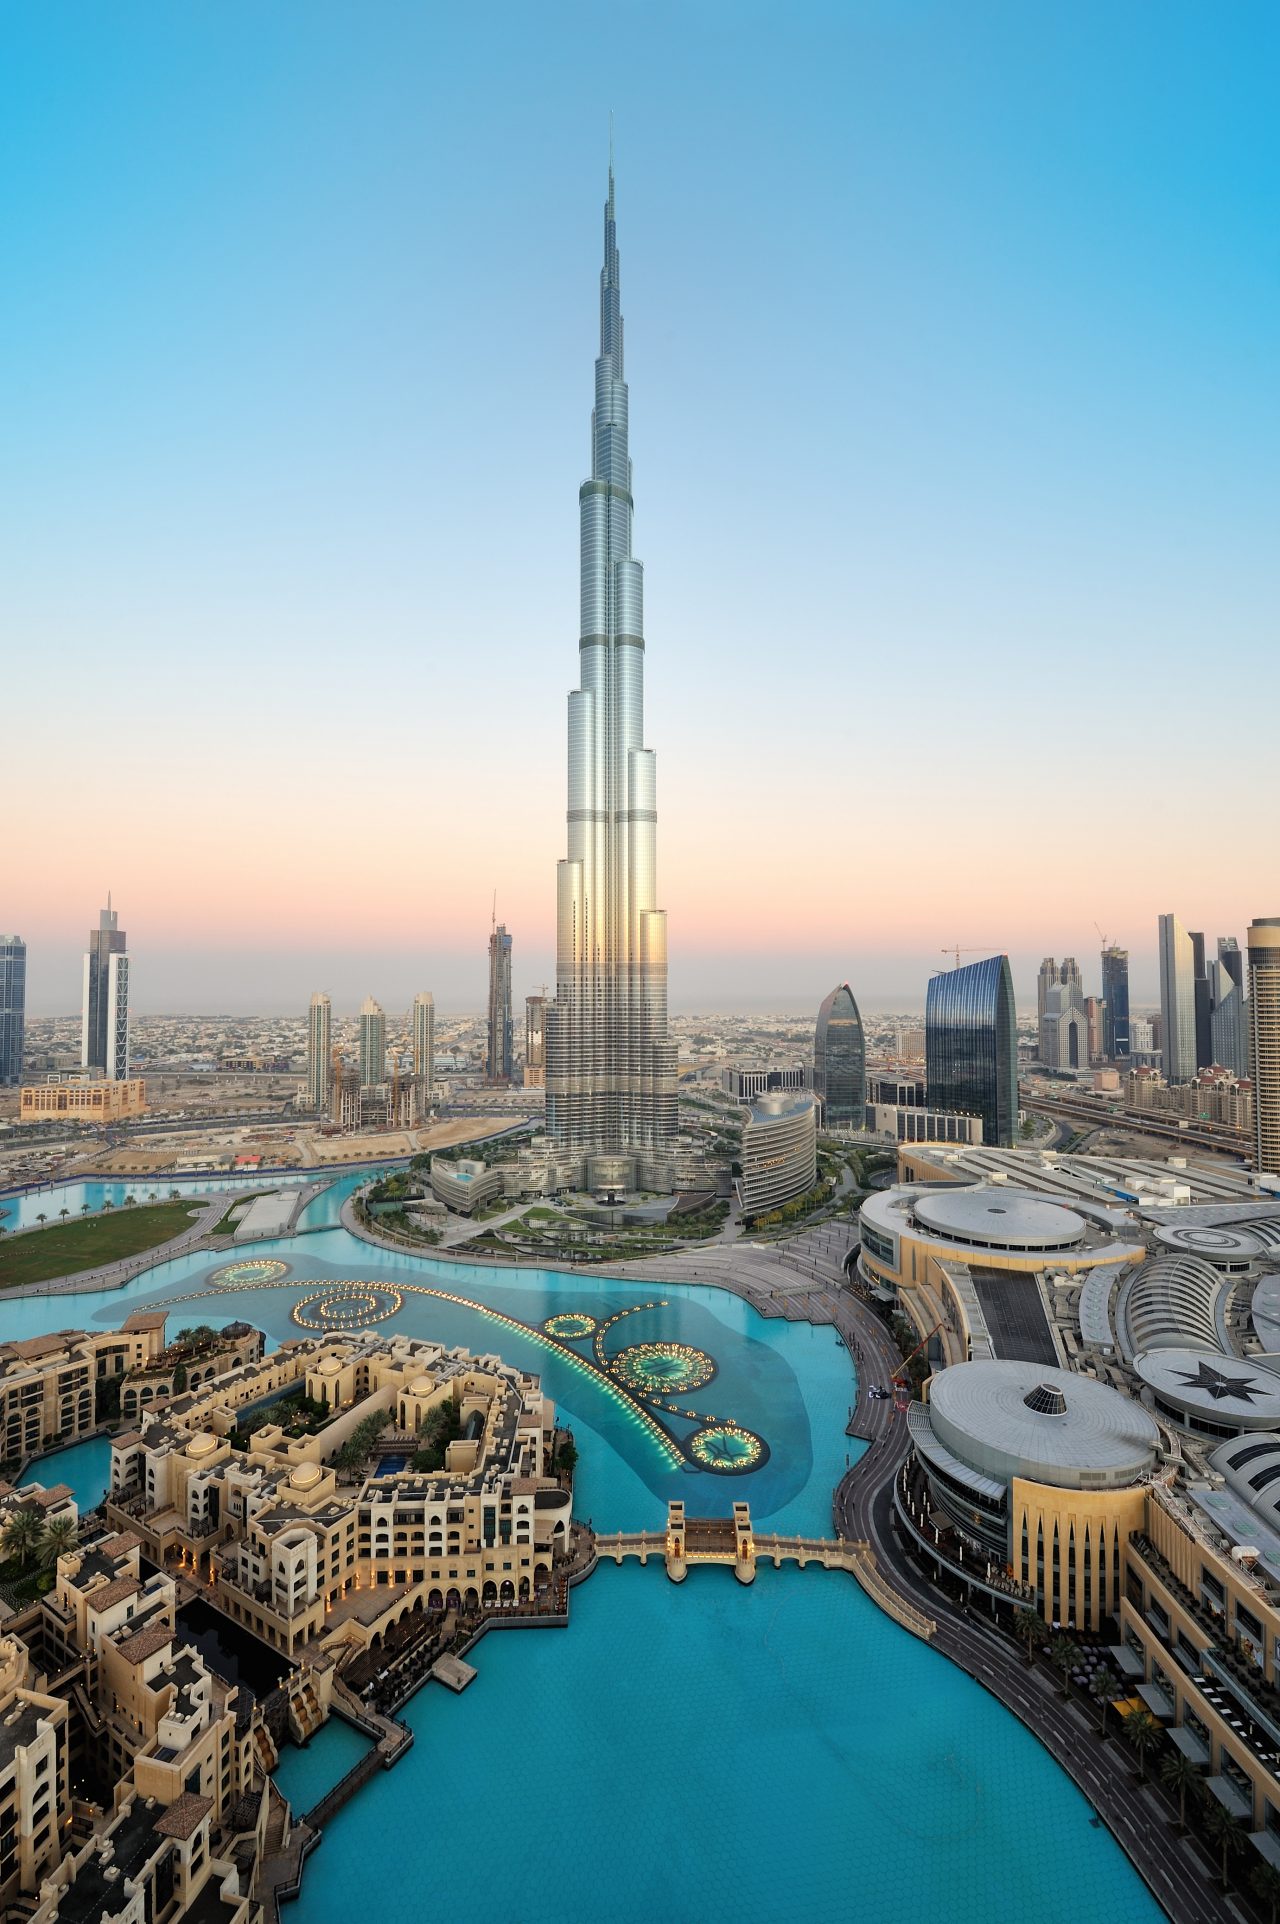 This is a very rare capture of burj khalifa and downtown dubai city in the first light morning with the fountain lights.